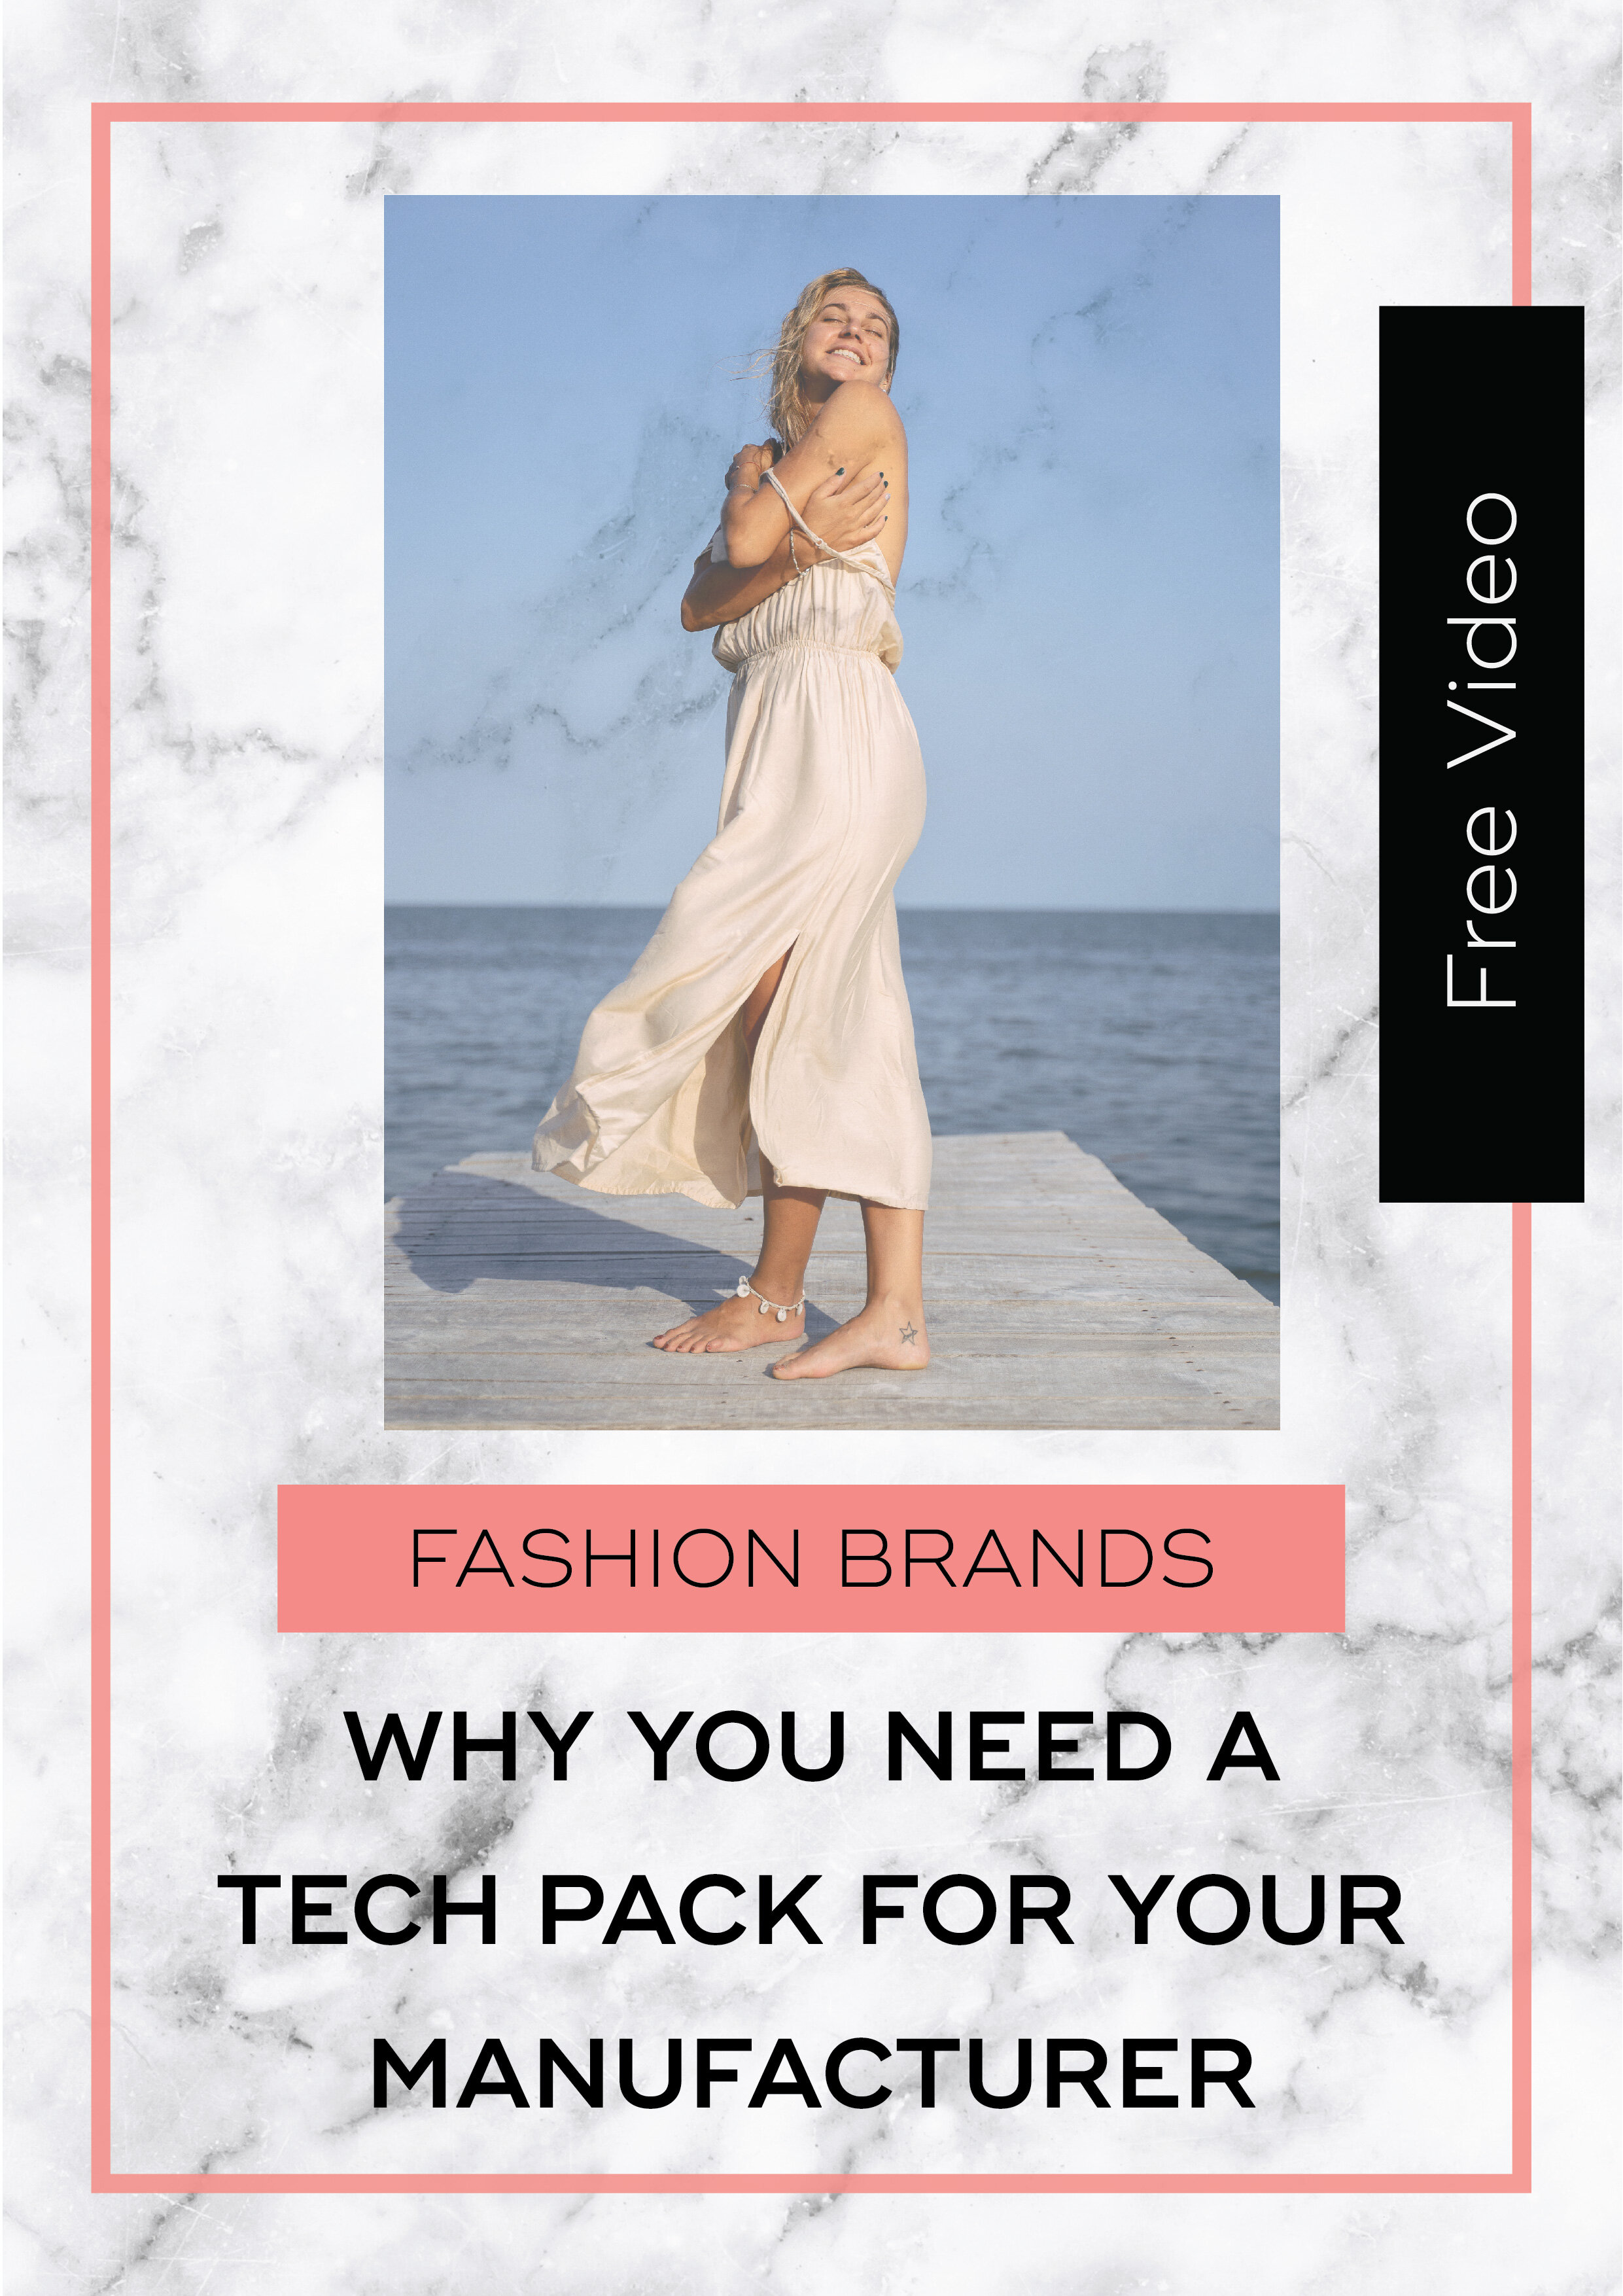 Fashion Brands Why You need a tech pack for your manufacturer video copy.jpg